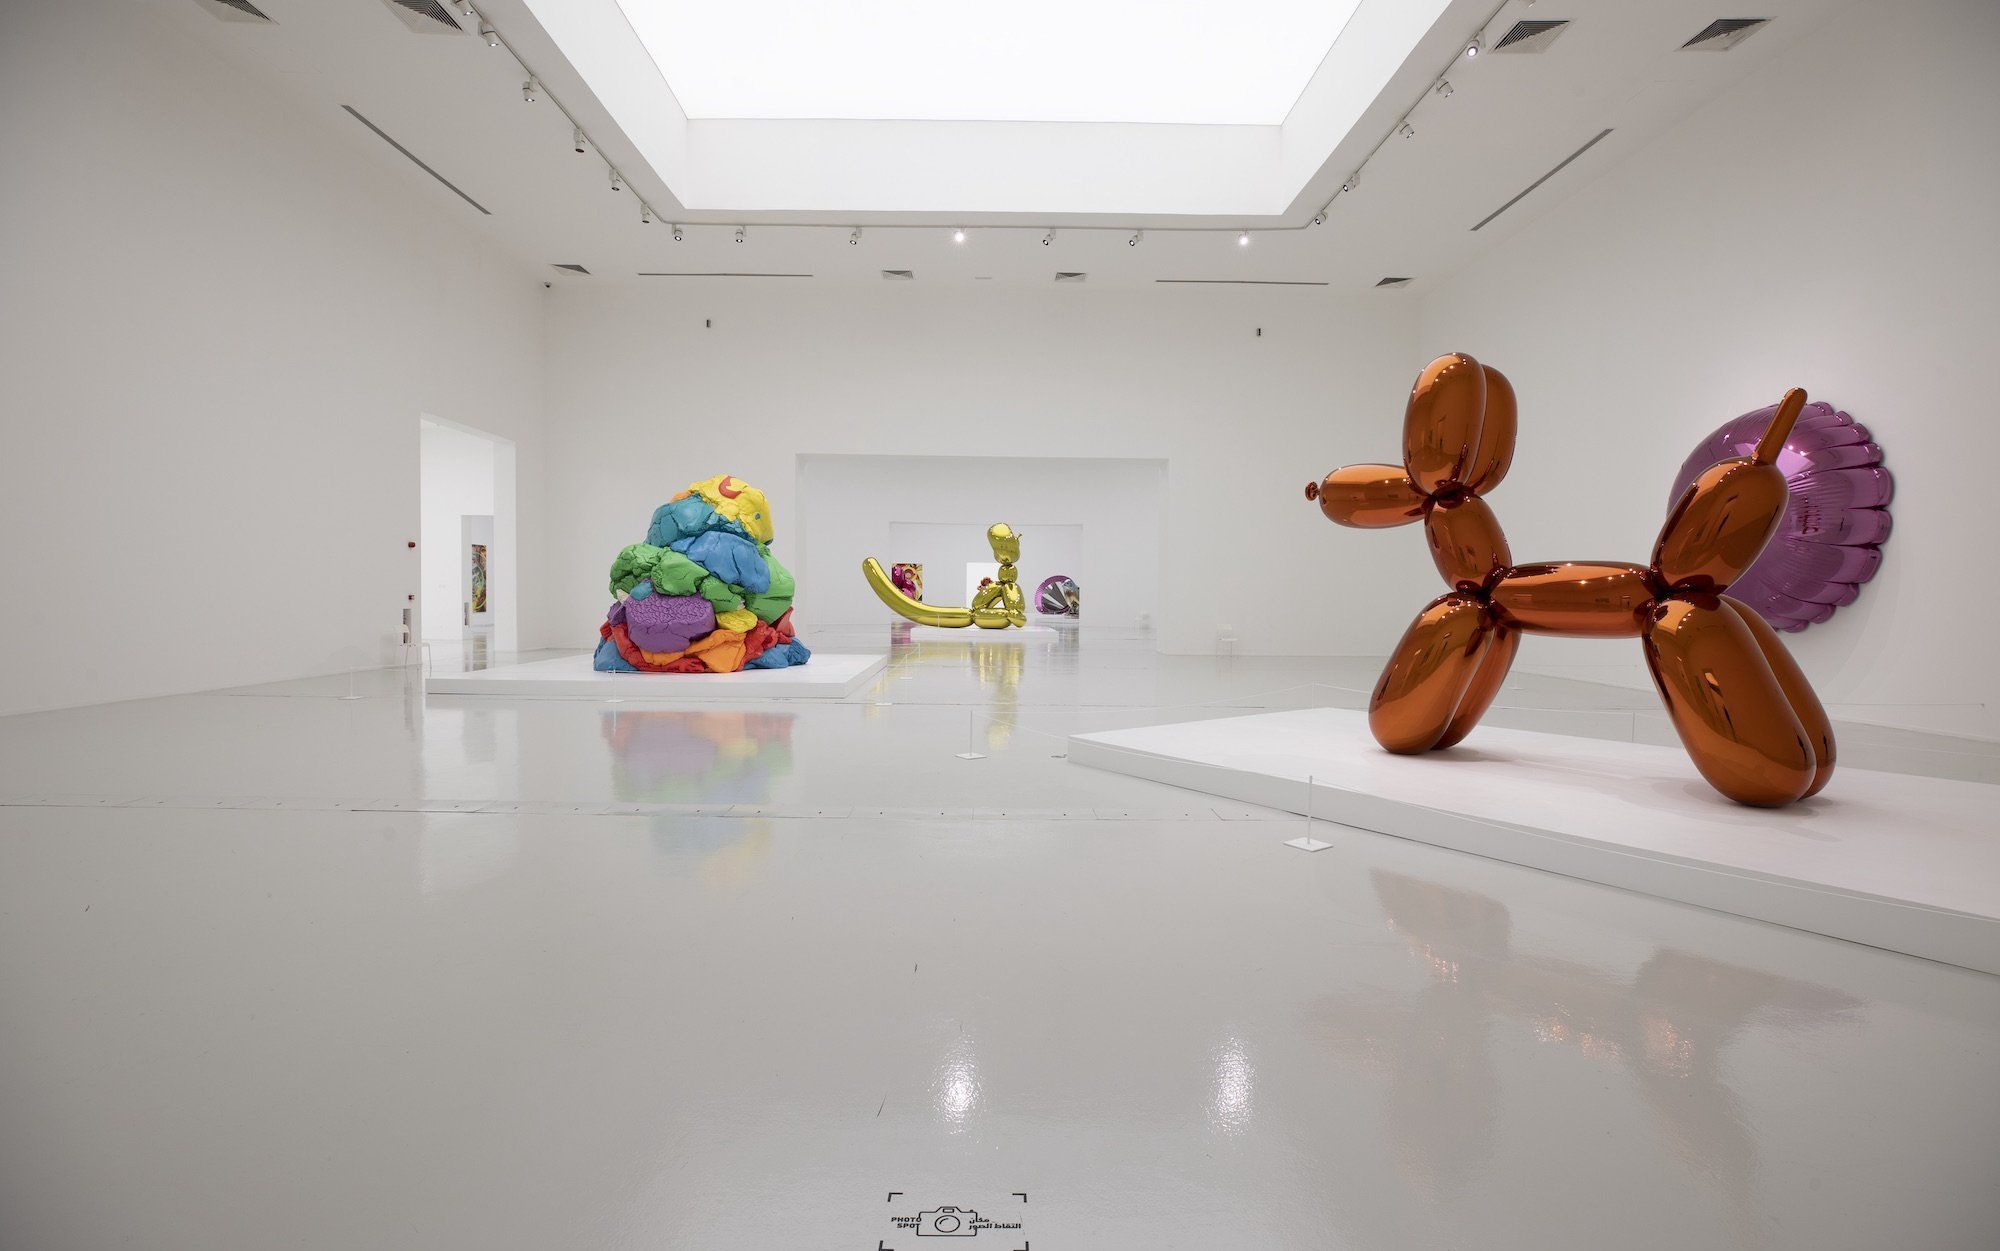 Bright gallery space with white walls and floor with colourful Jeff Koons sculptures depicting giant balloon animals.